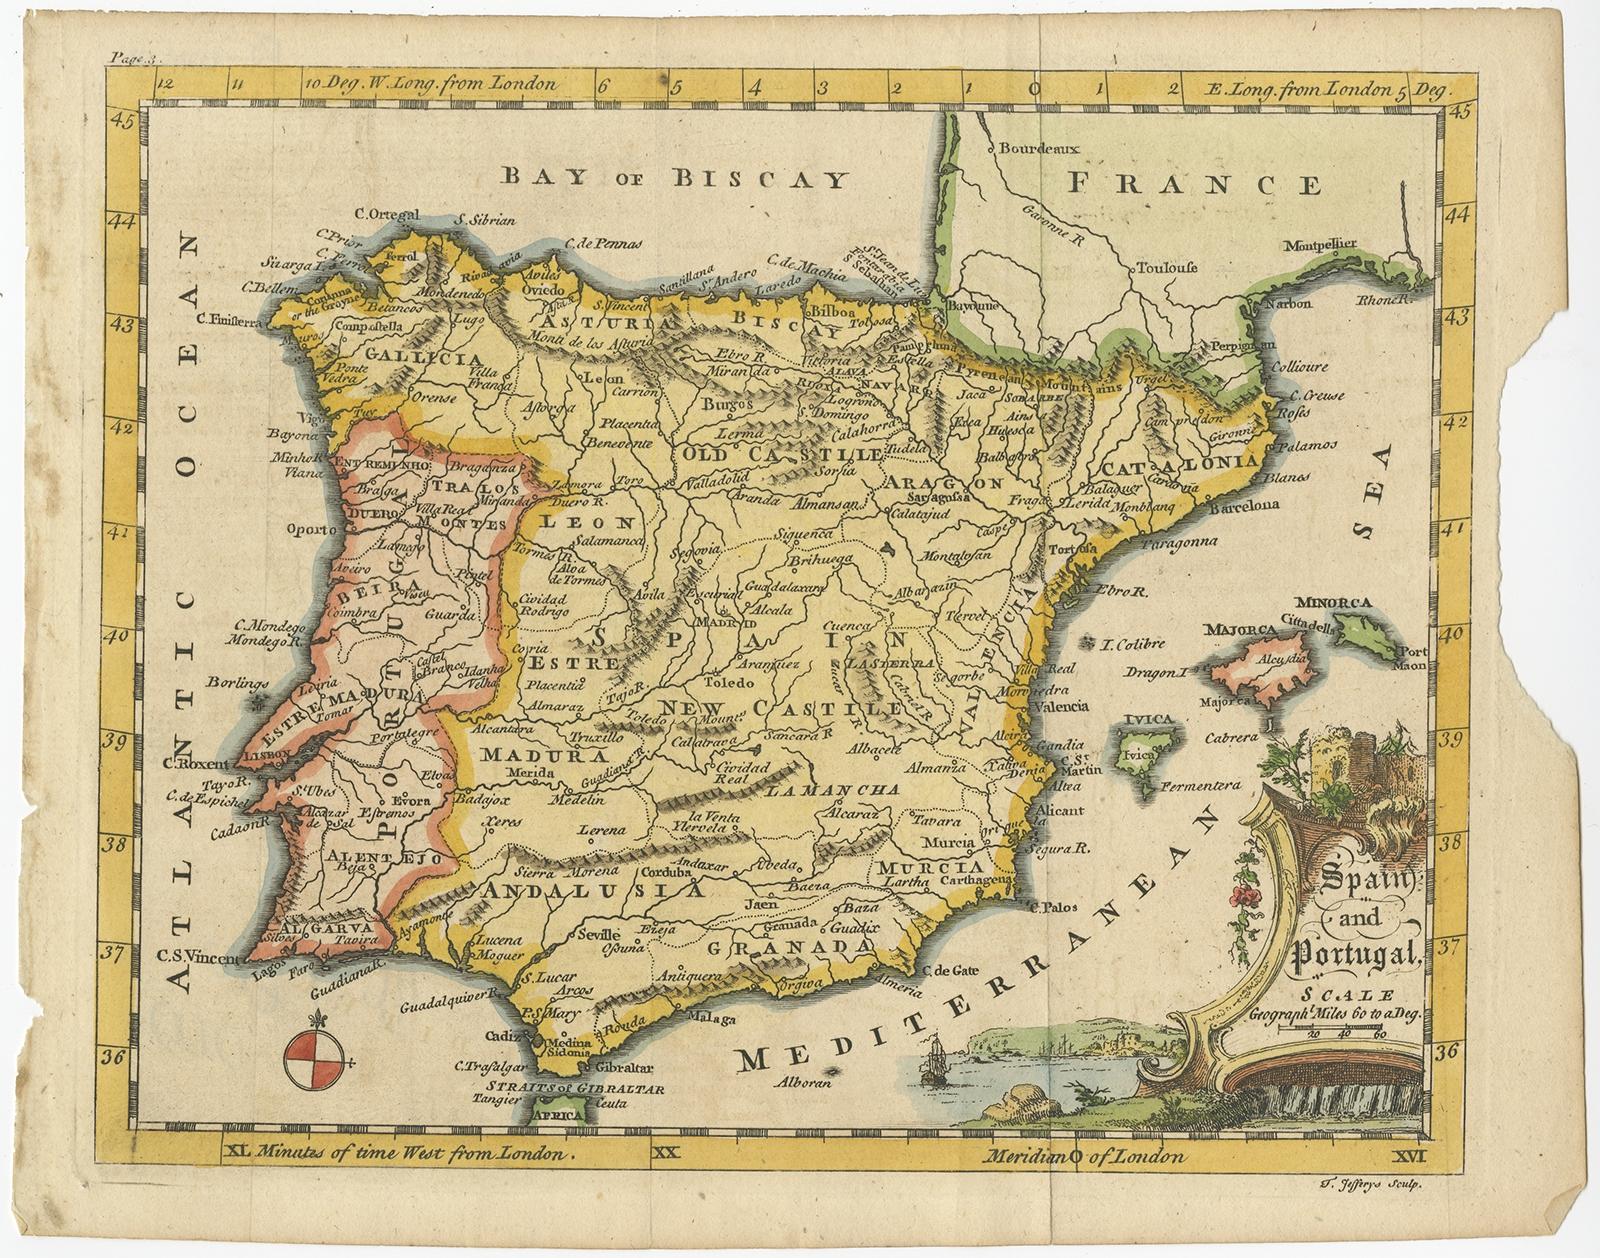 Antique map titled 'Spain and Portugal'. 

Small, detailed antique map of Spain and Portugal (Iberian Peninsula). Decorative title cartouche. 

Artists and Engravers: Thomas Jefferys (c.1719 - 1771), 